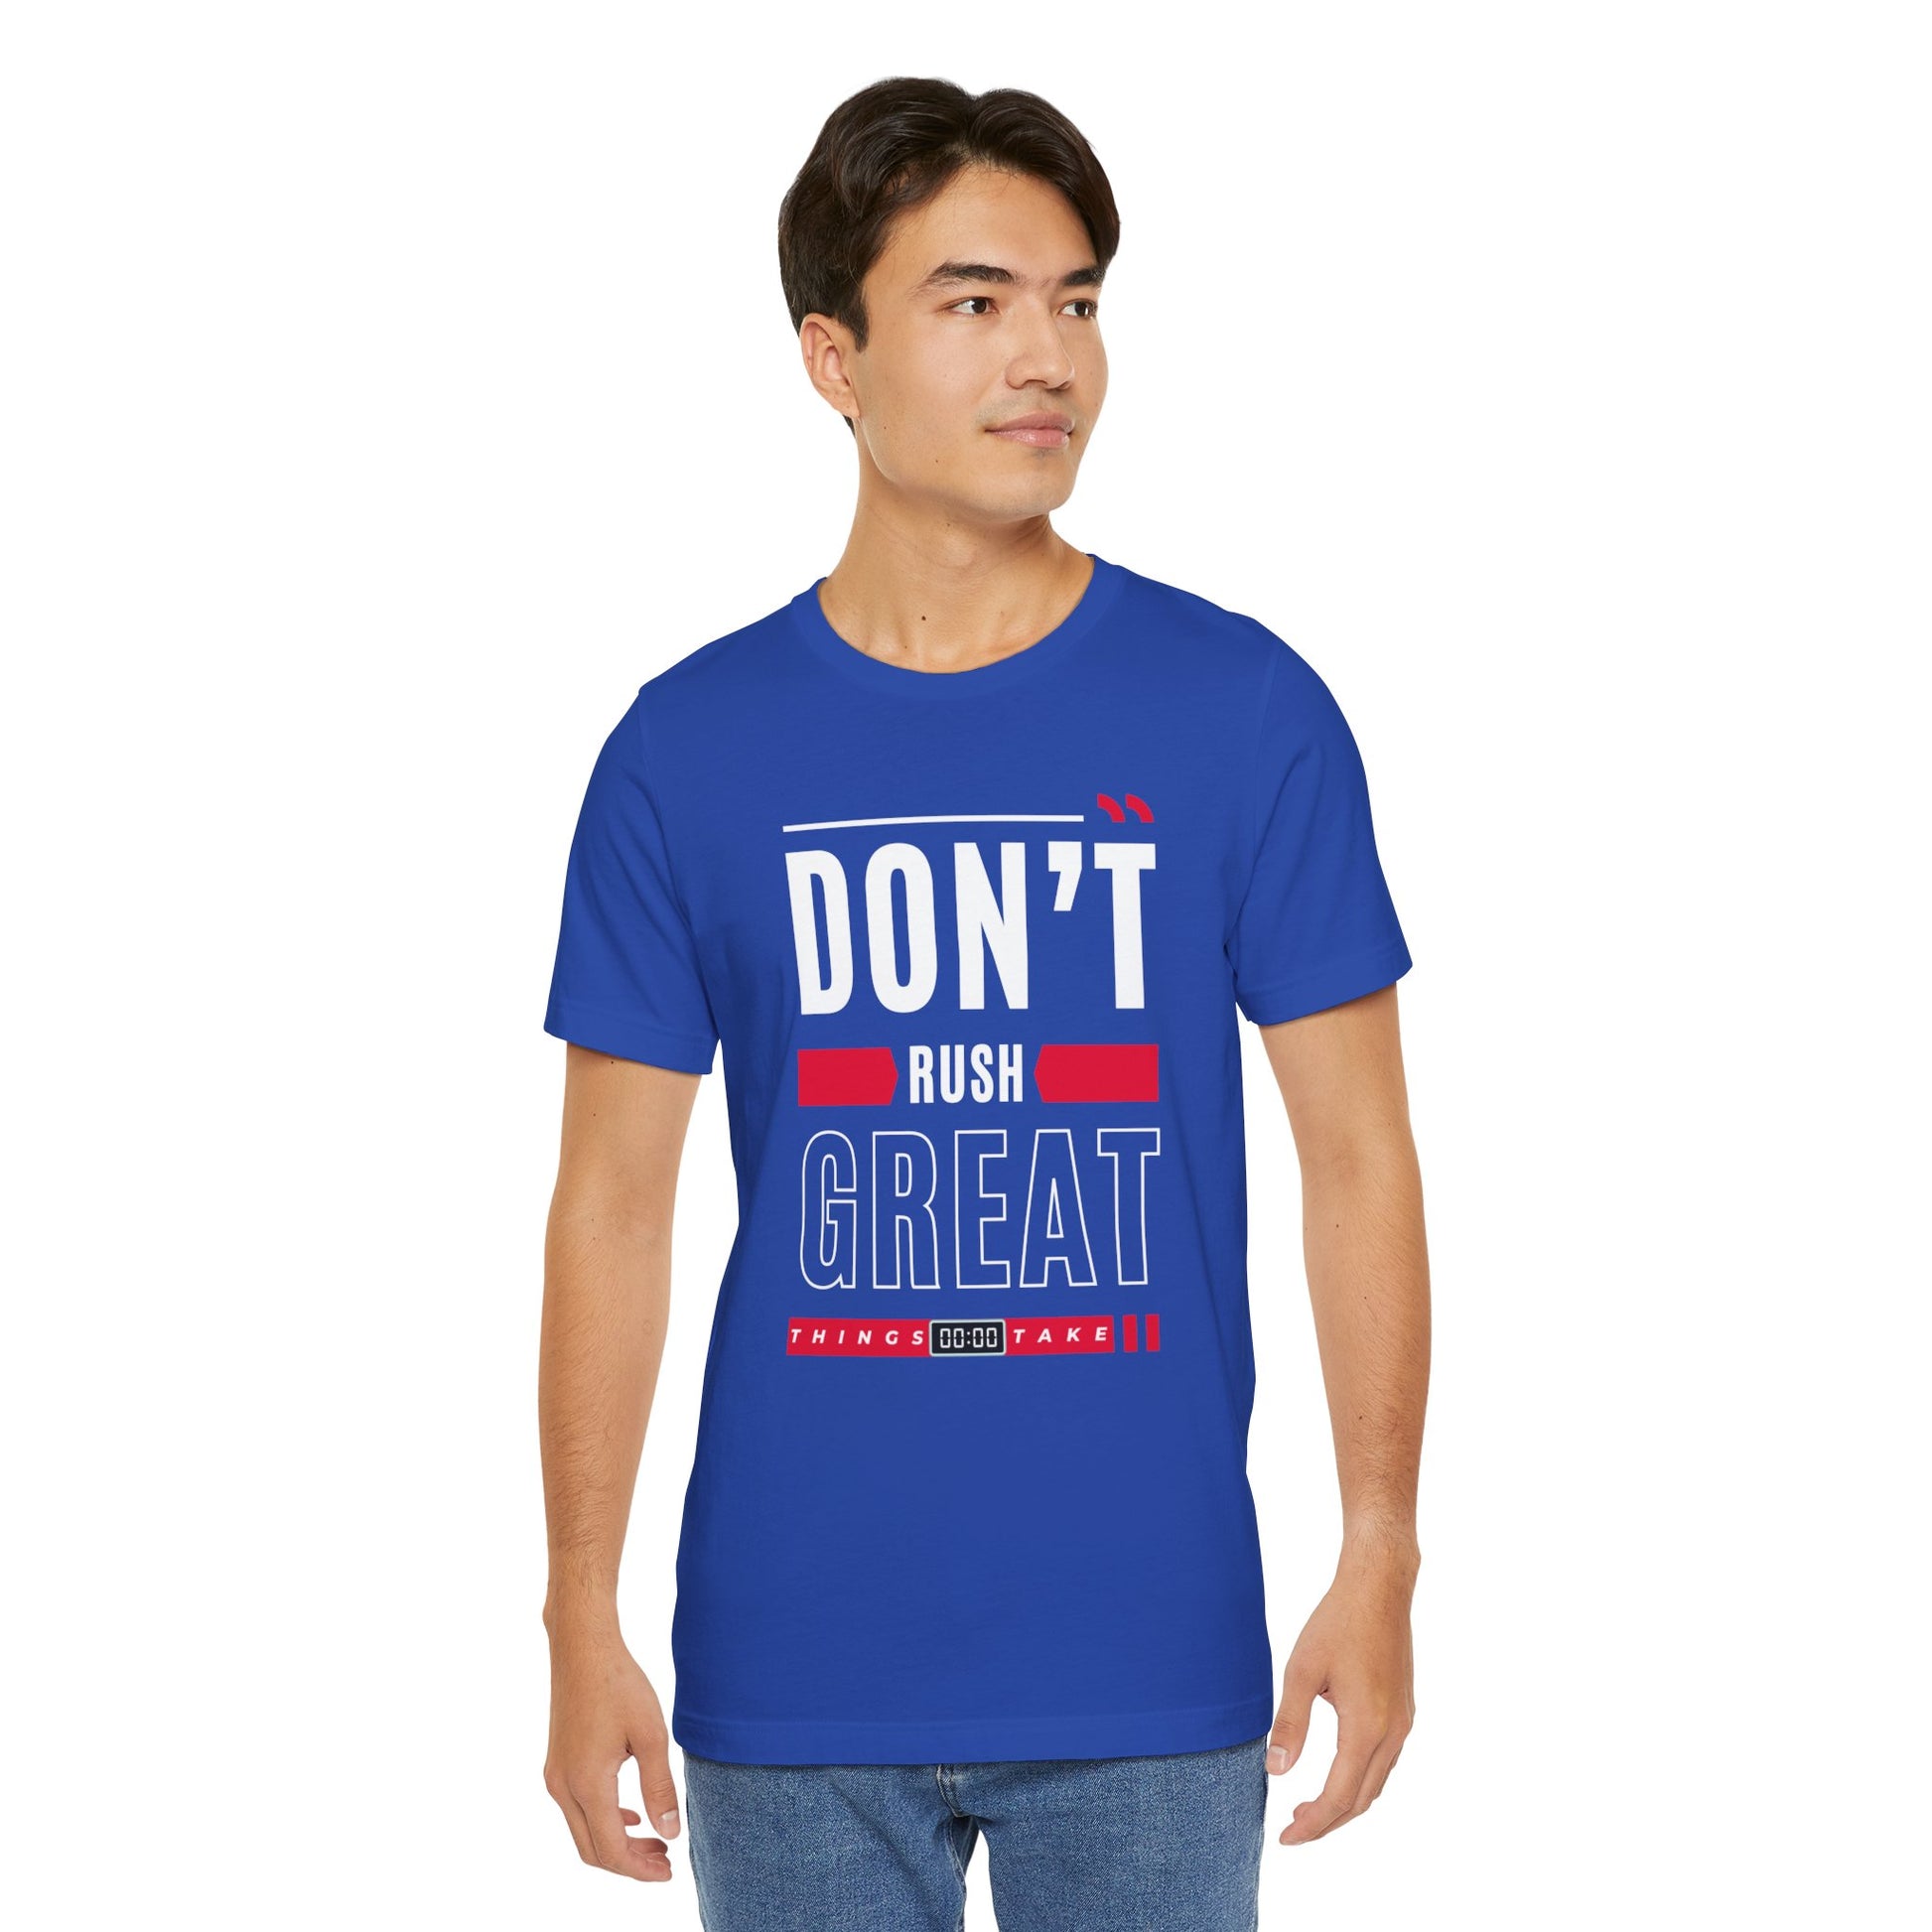 Don't Rush Great Things Time Unisex Jersey Short Sleeve Tee - AH VISION